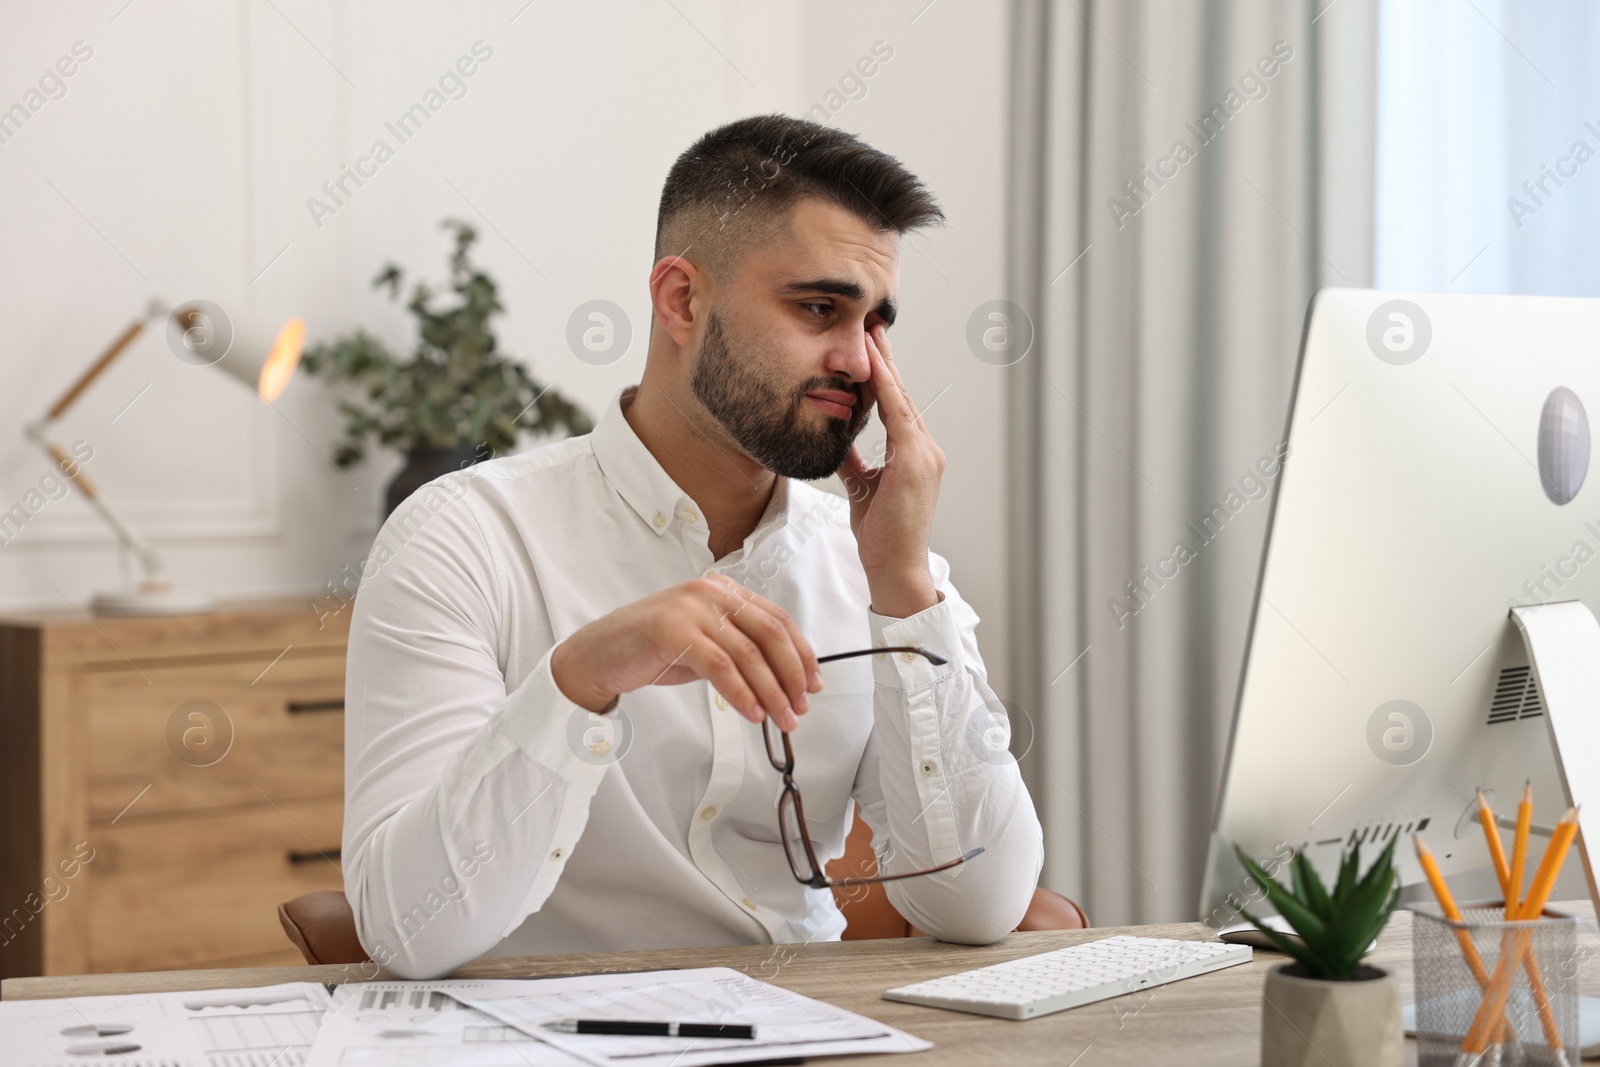 Photo of Overwhelmed man with glasses sitting at table in office